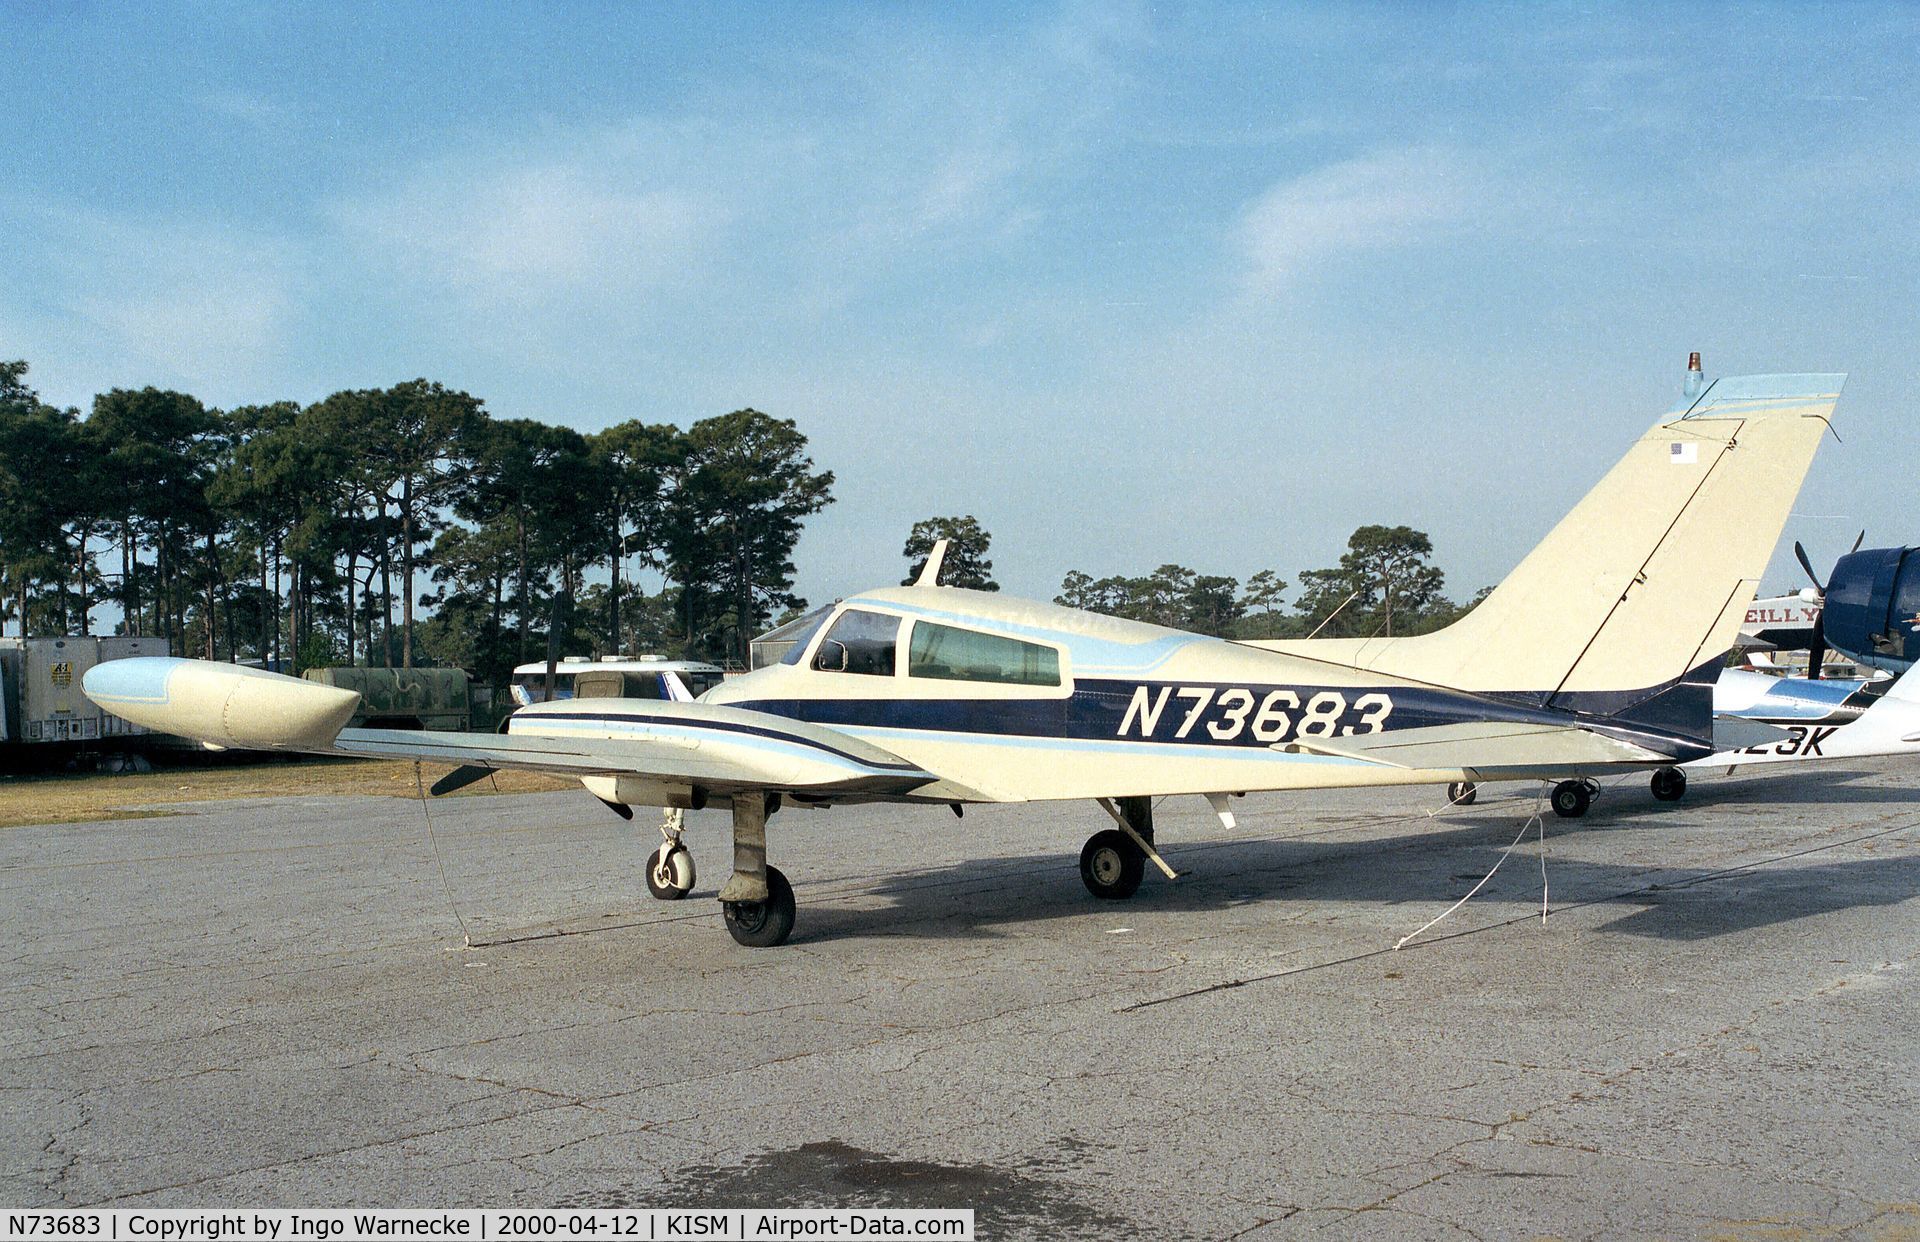 N73683, 1969 Cessna 310N C/N 310N-0014, Cessna 310N at Kissimmee airport, close to the Flying Tigers Aircraft Museum